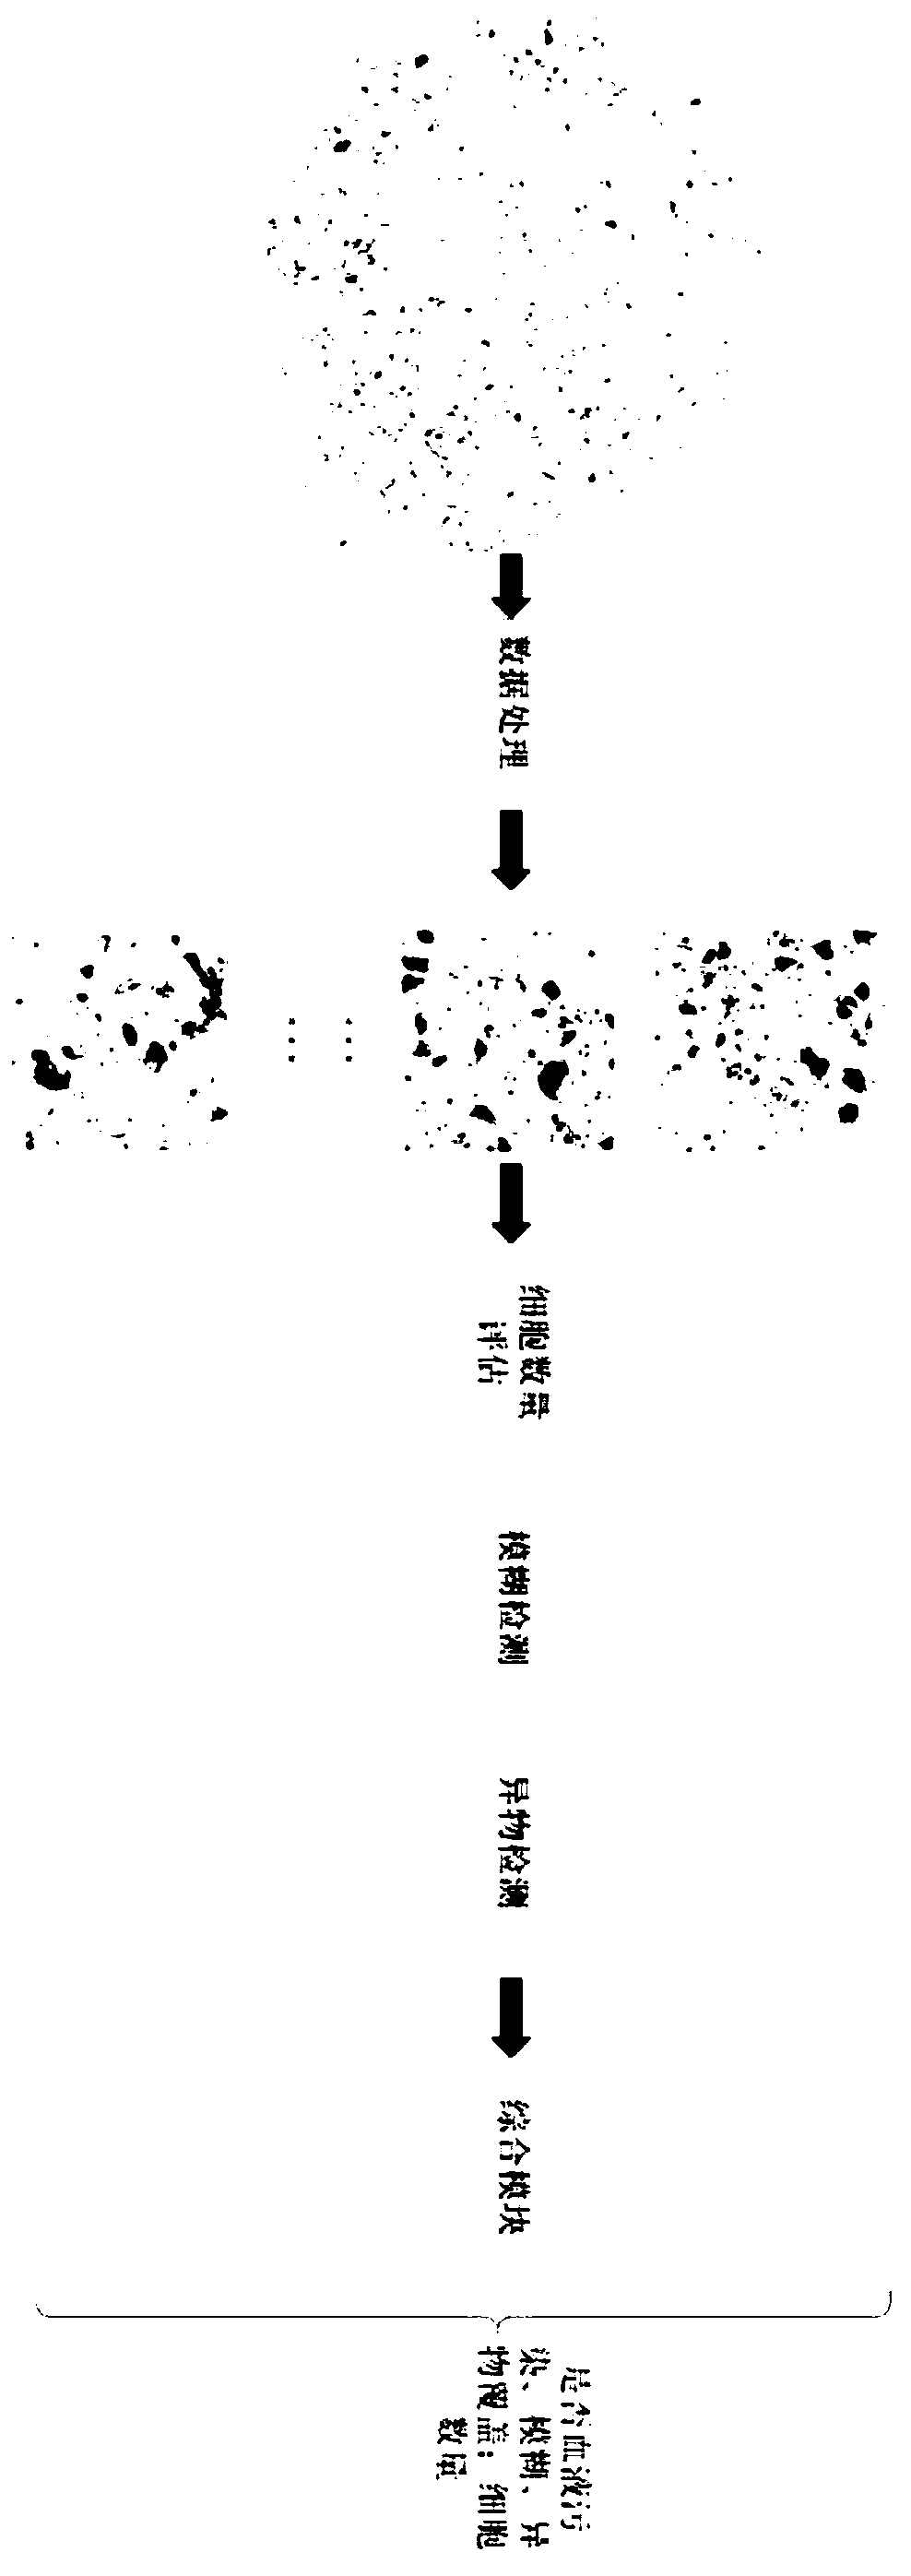 Cervical liquid-based cell slice quality detecting system